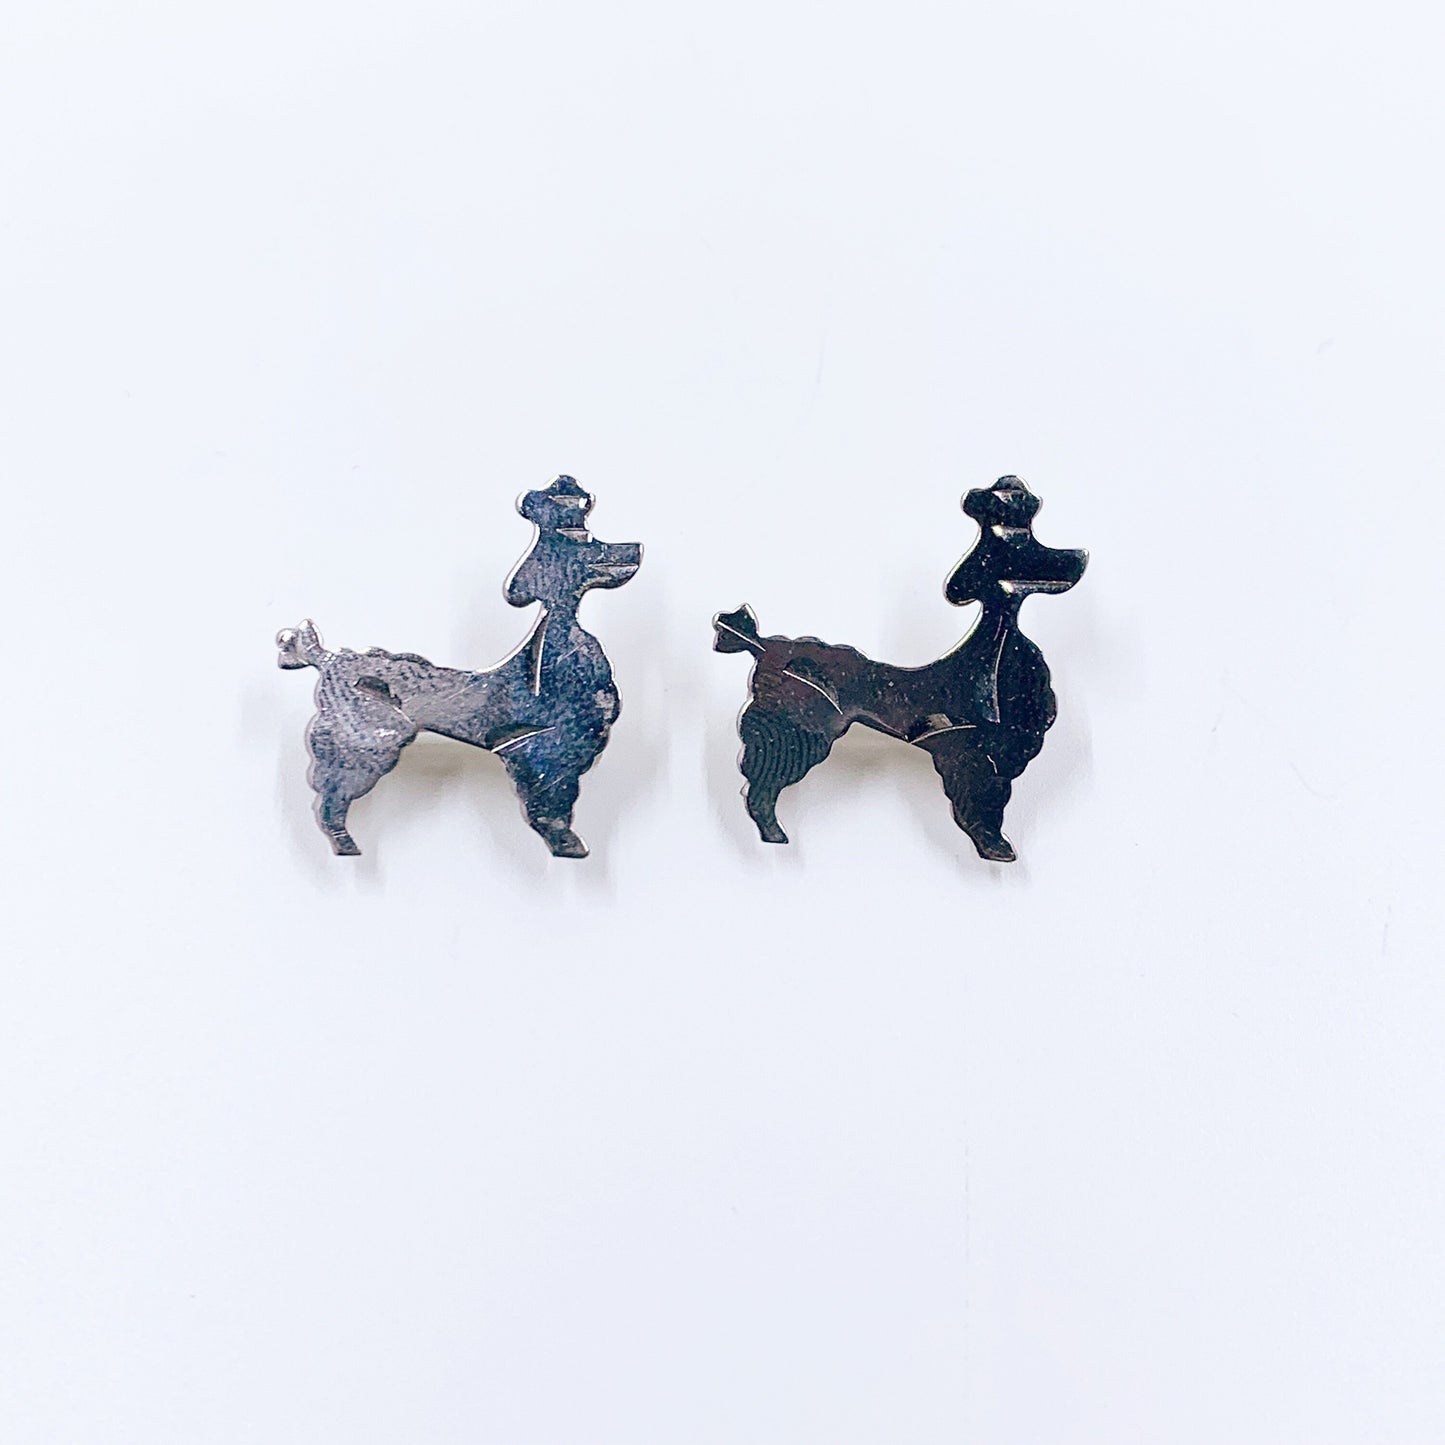 Vintage Sterling Silver Poodle Brooch Pins | Set of 2 Brooches